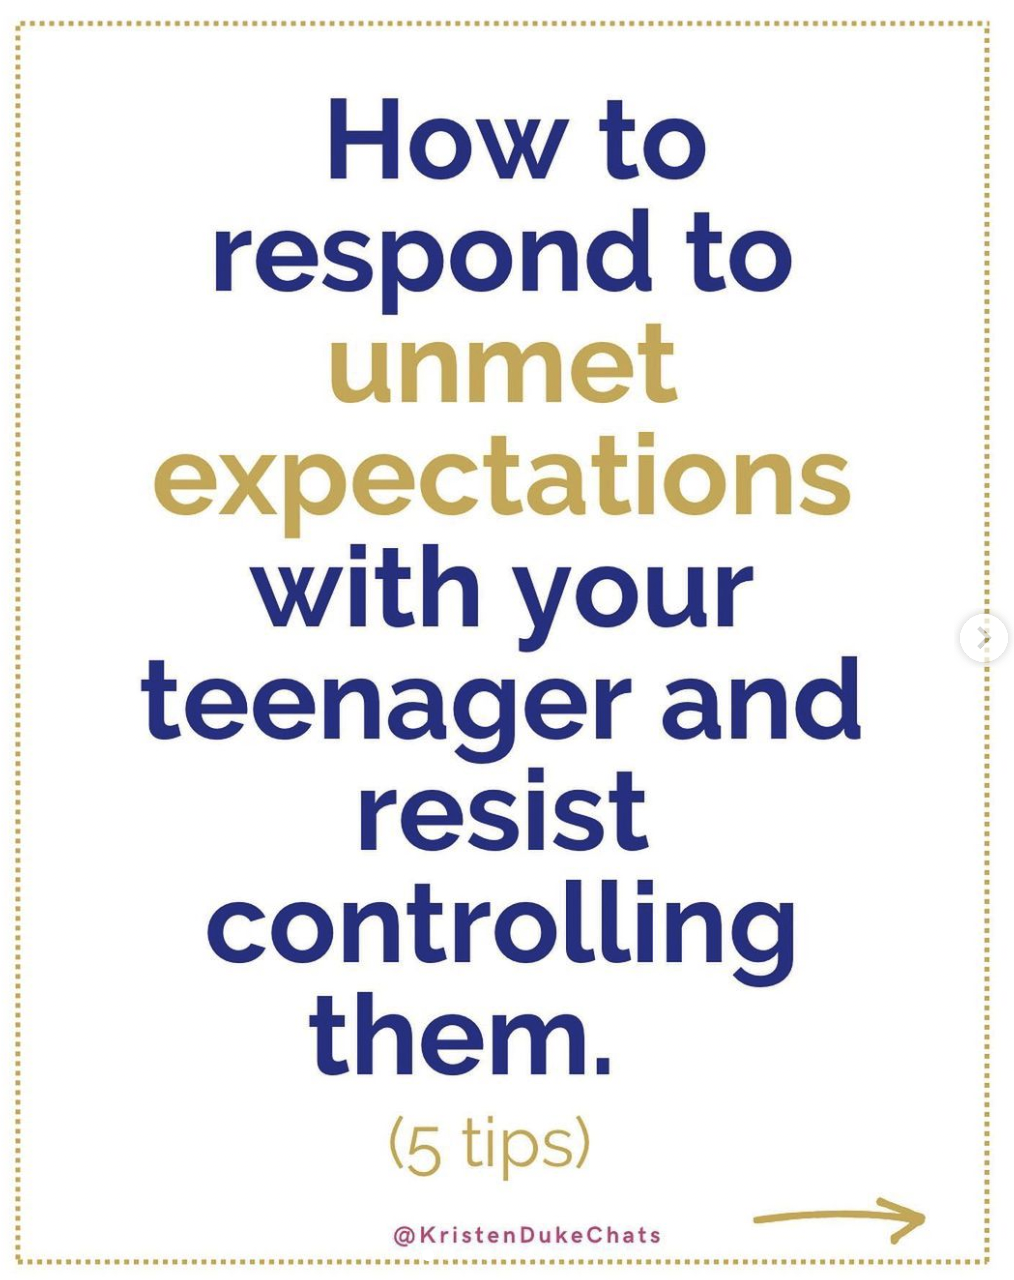 Parent control and unmet expectations